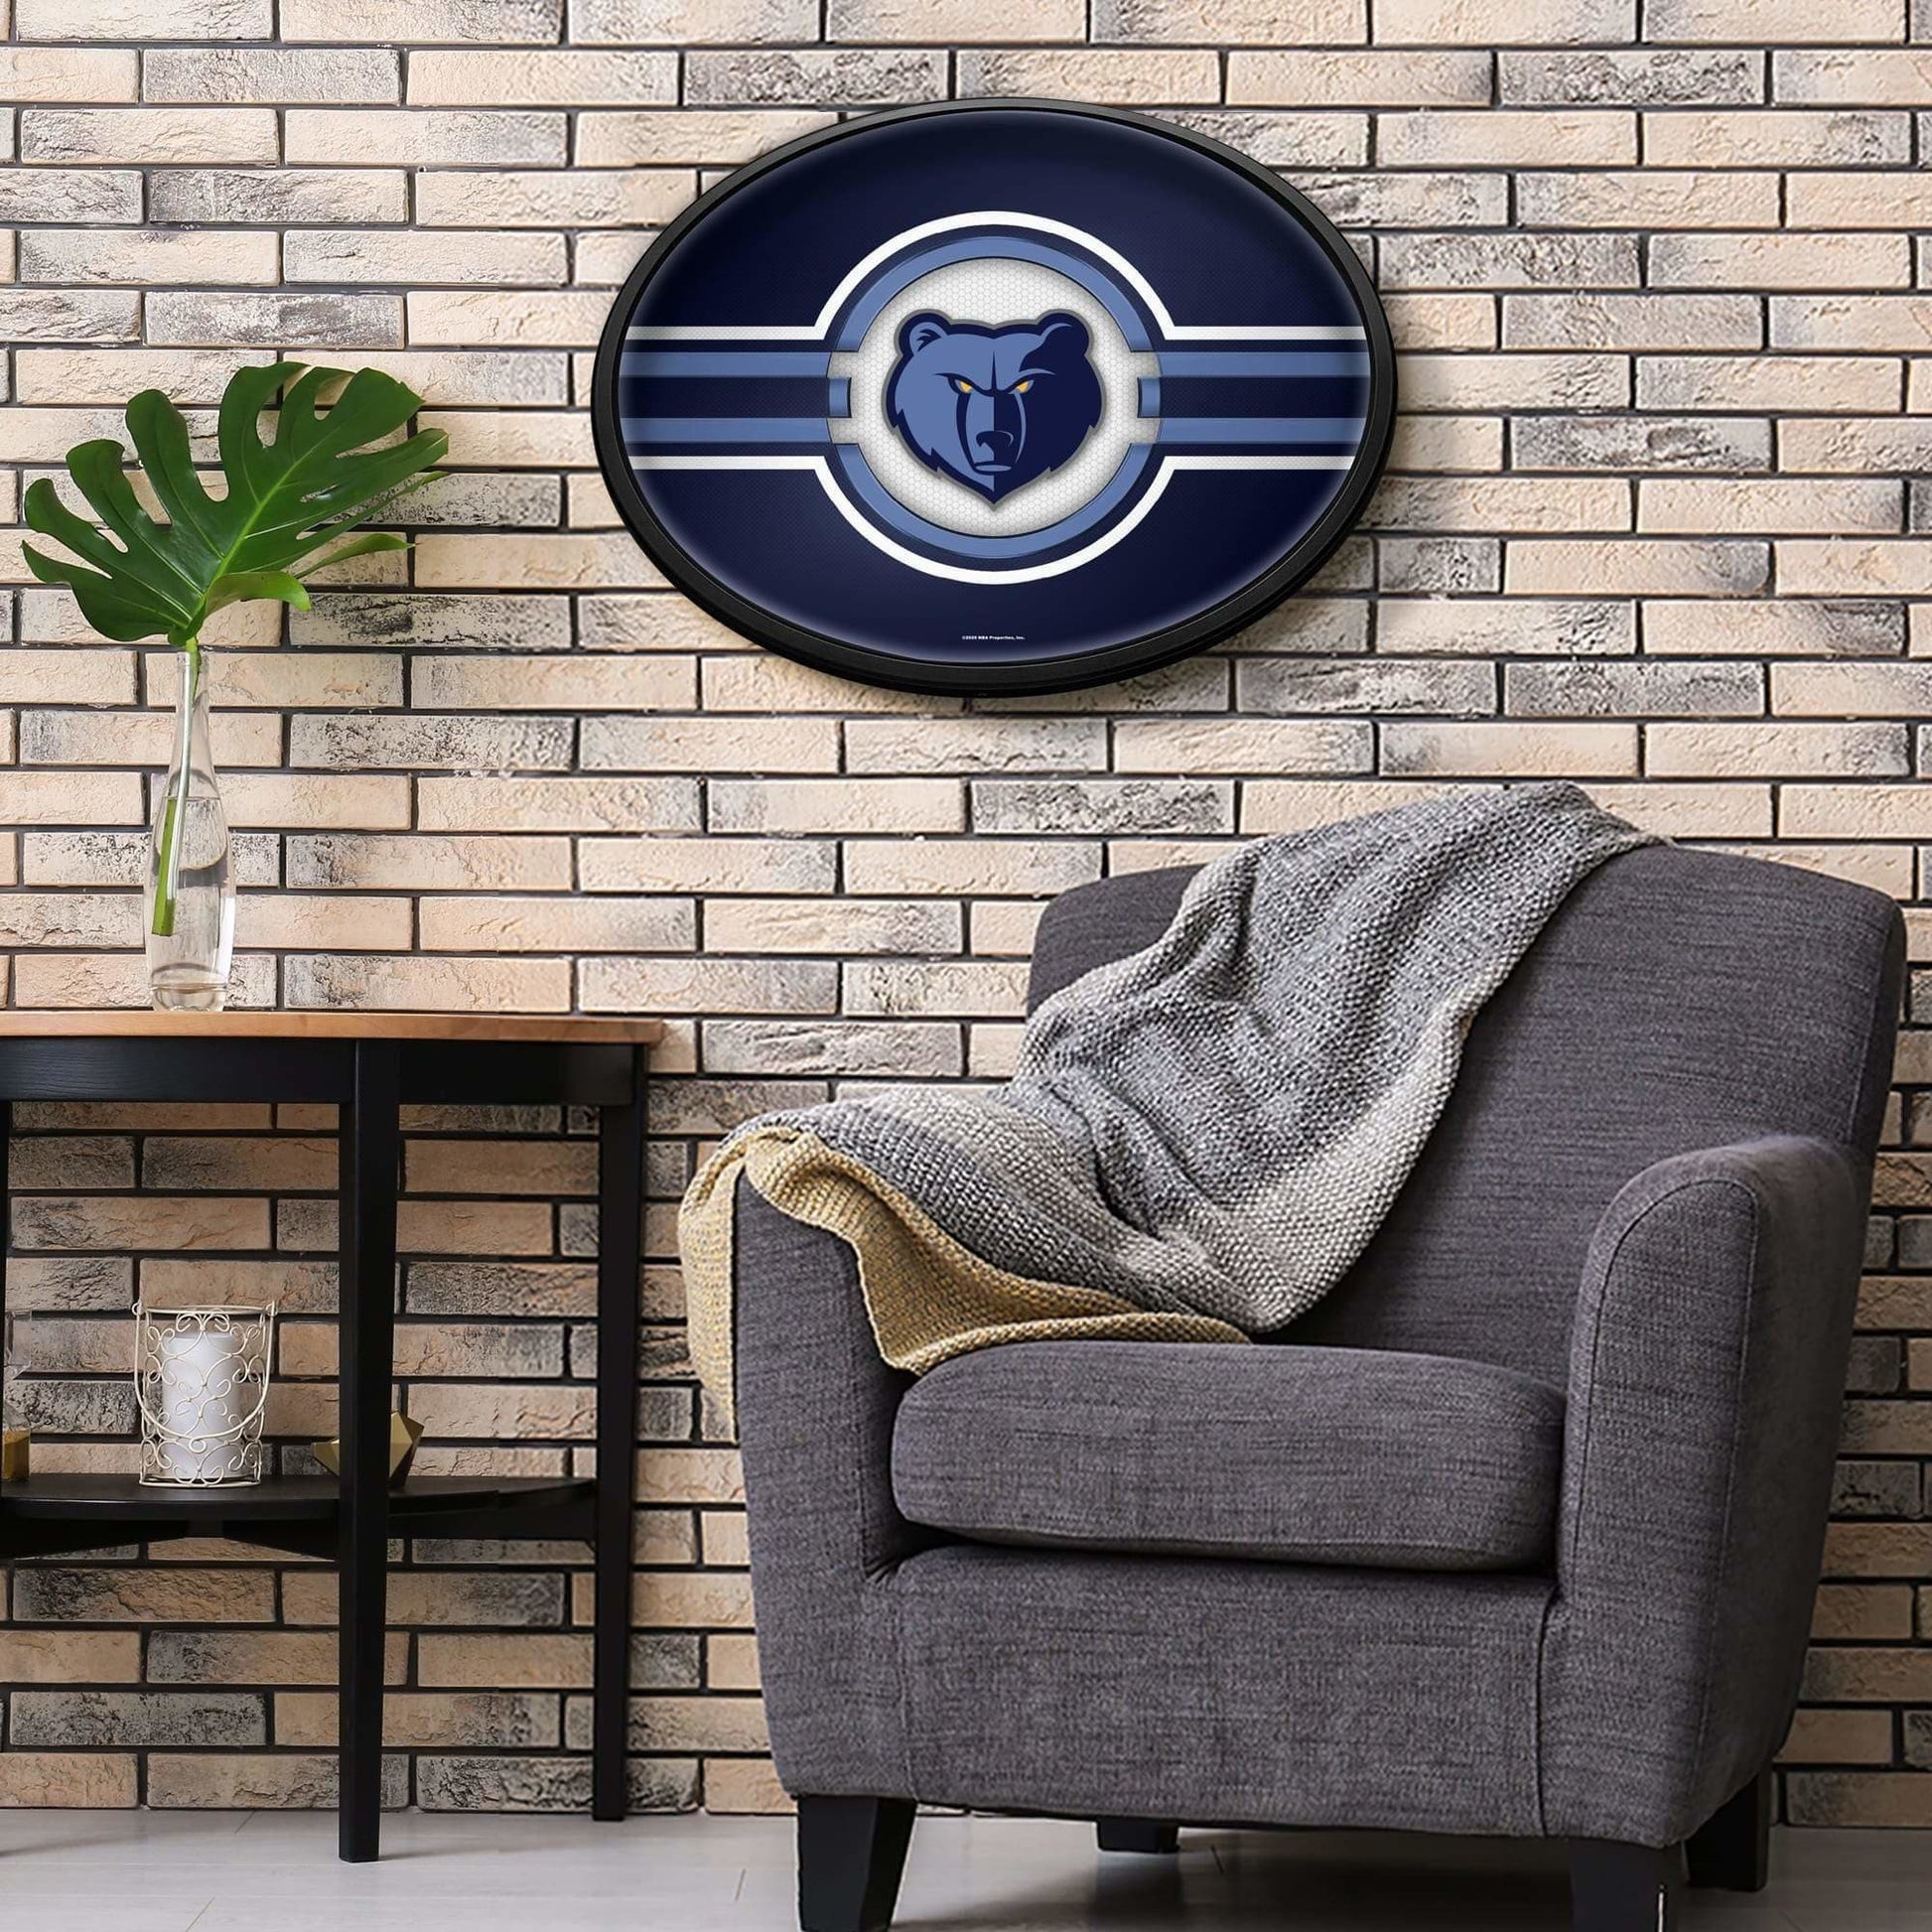 Memphis Grizzlies: Oval Slimline Lighted Wall Sign - The Fan-Brand